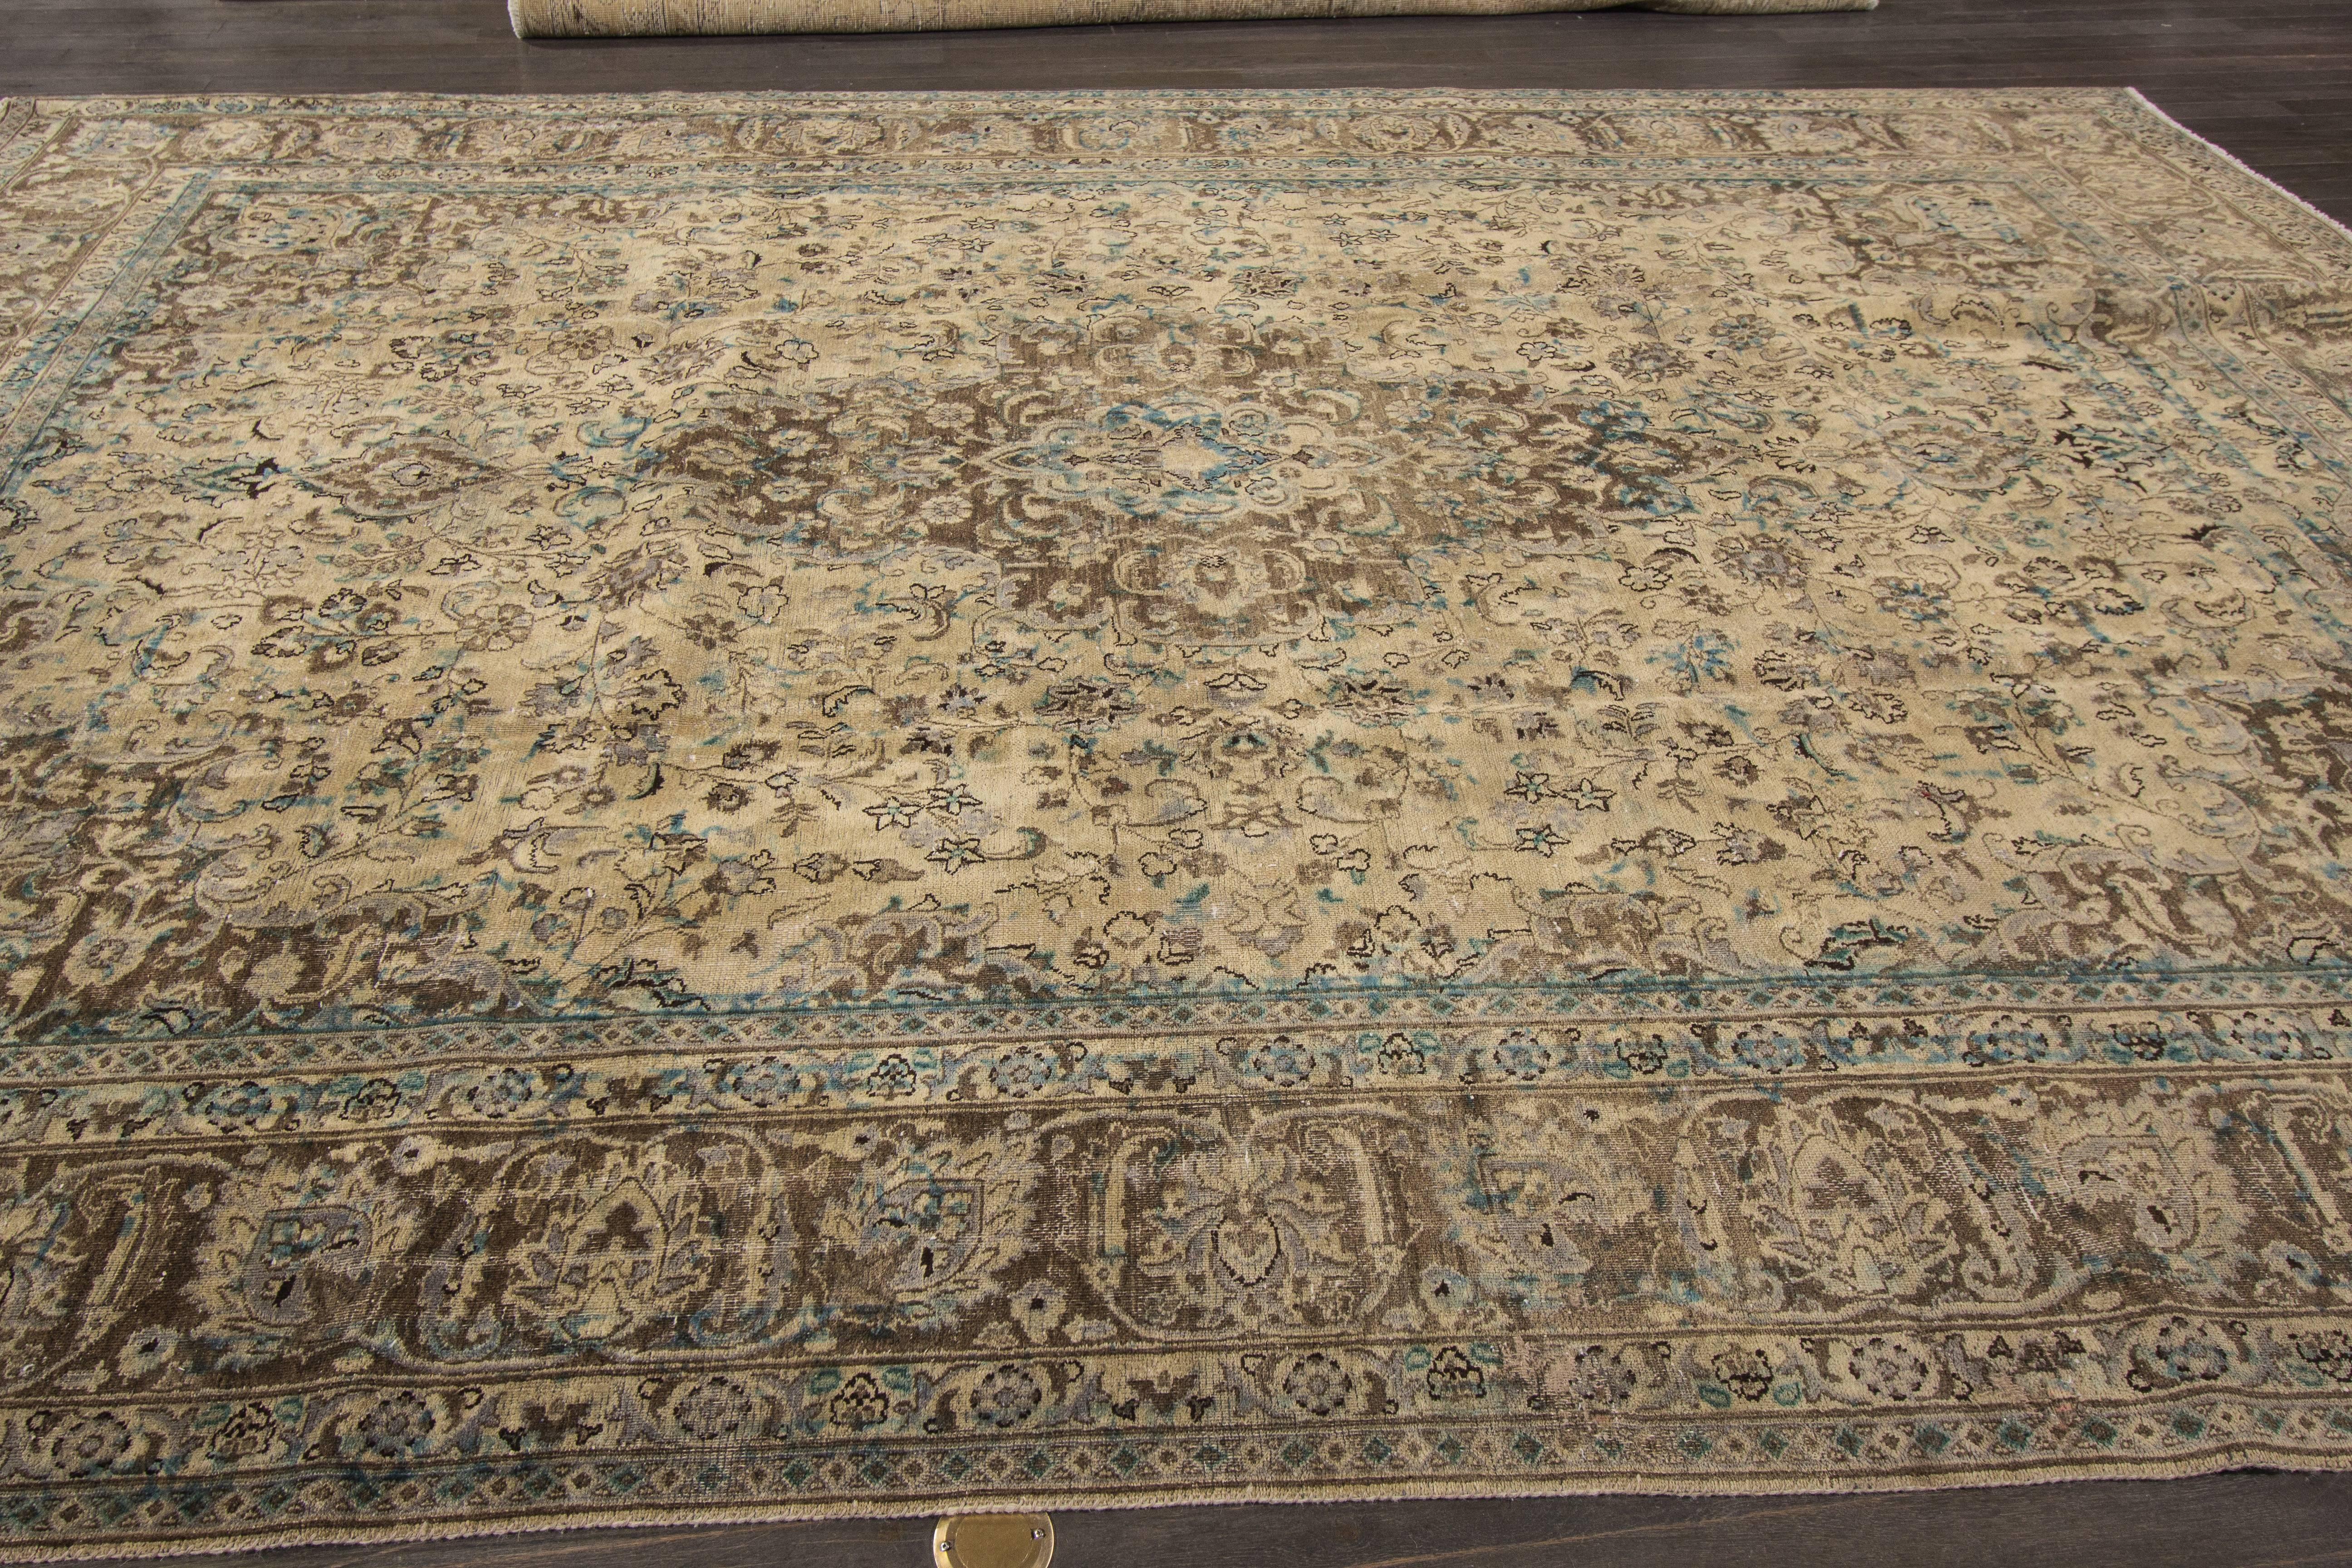 Captivating Superb Persian Tabriz Rug In Good Condition For Sale In Norwalk, CT